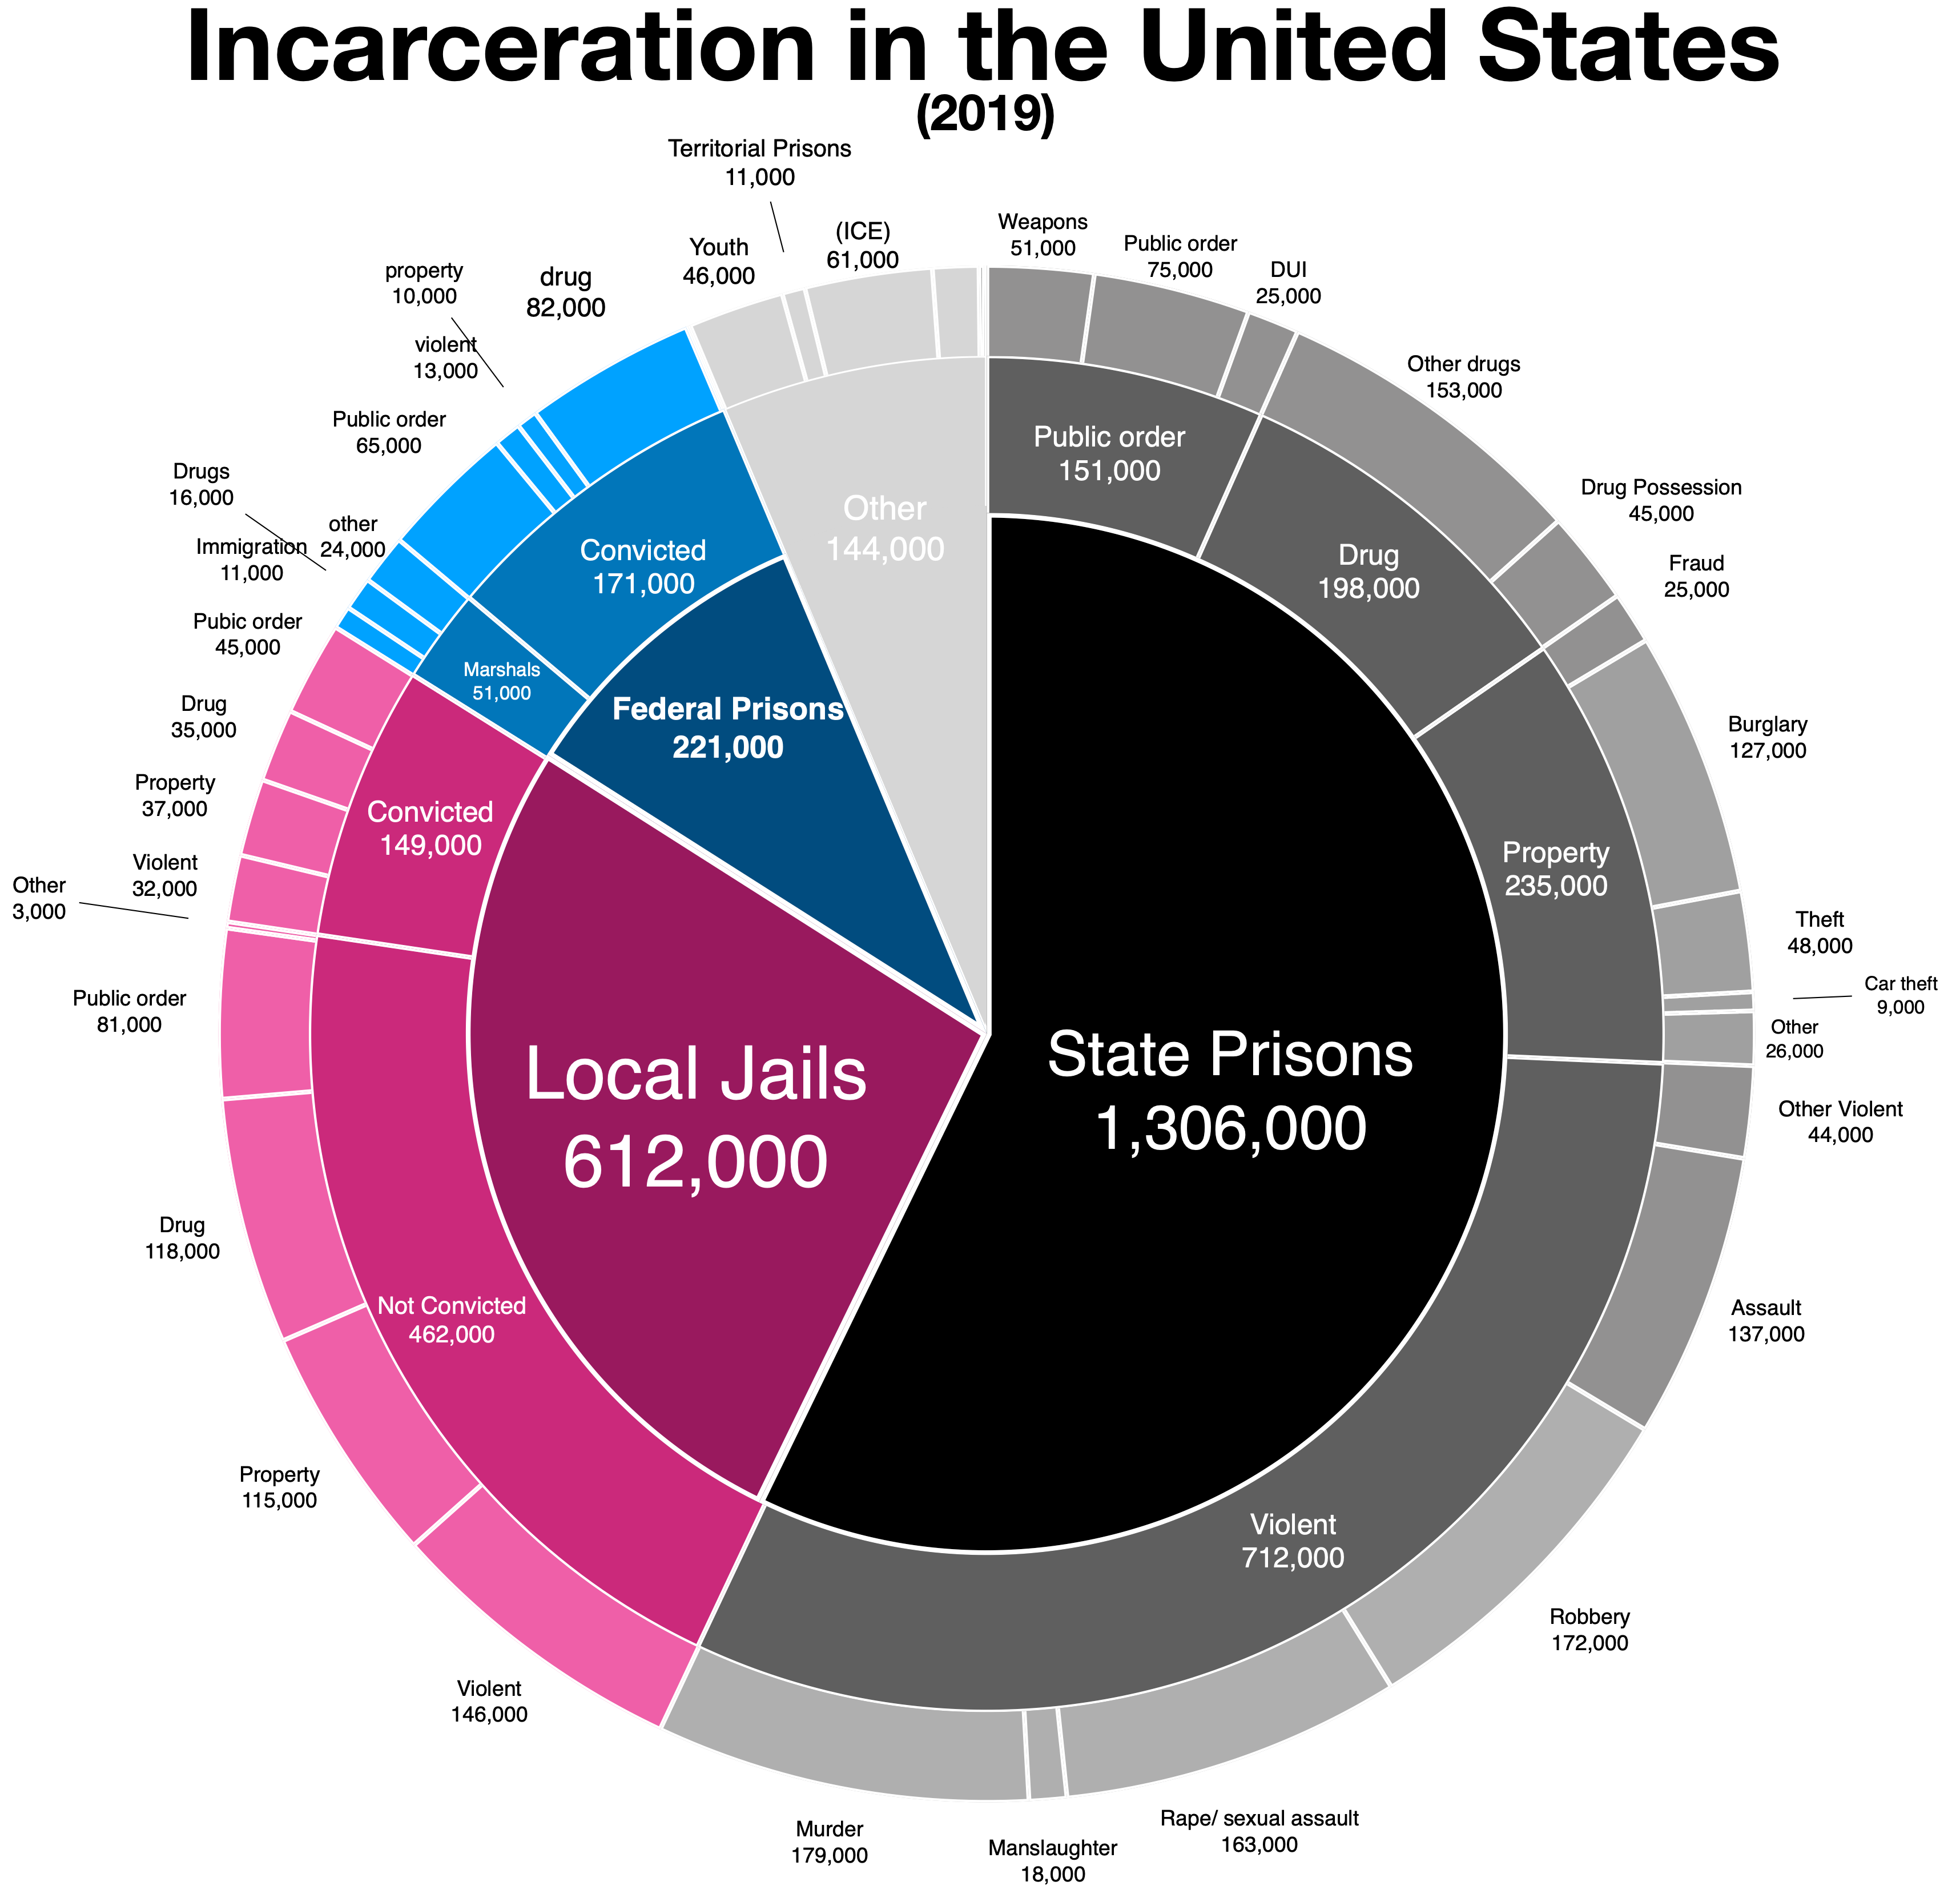 Incarceration in the United States